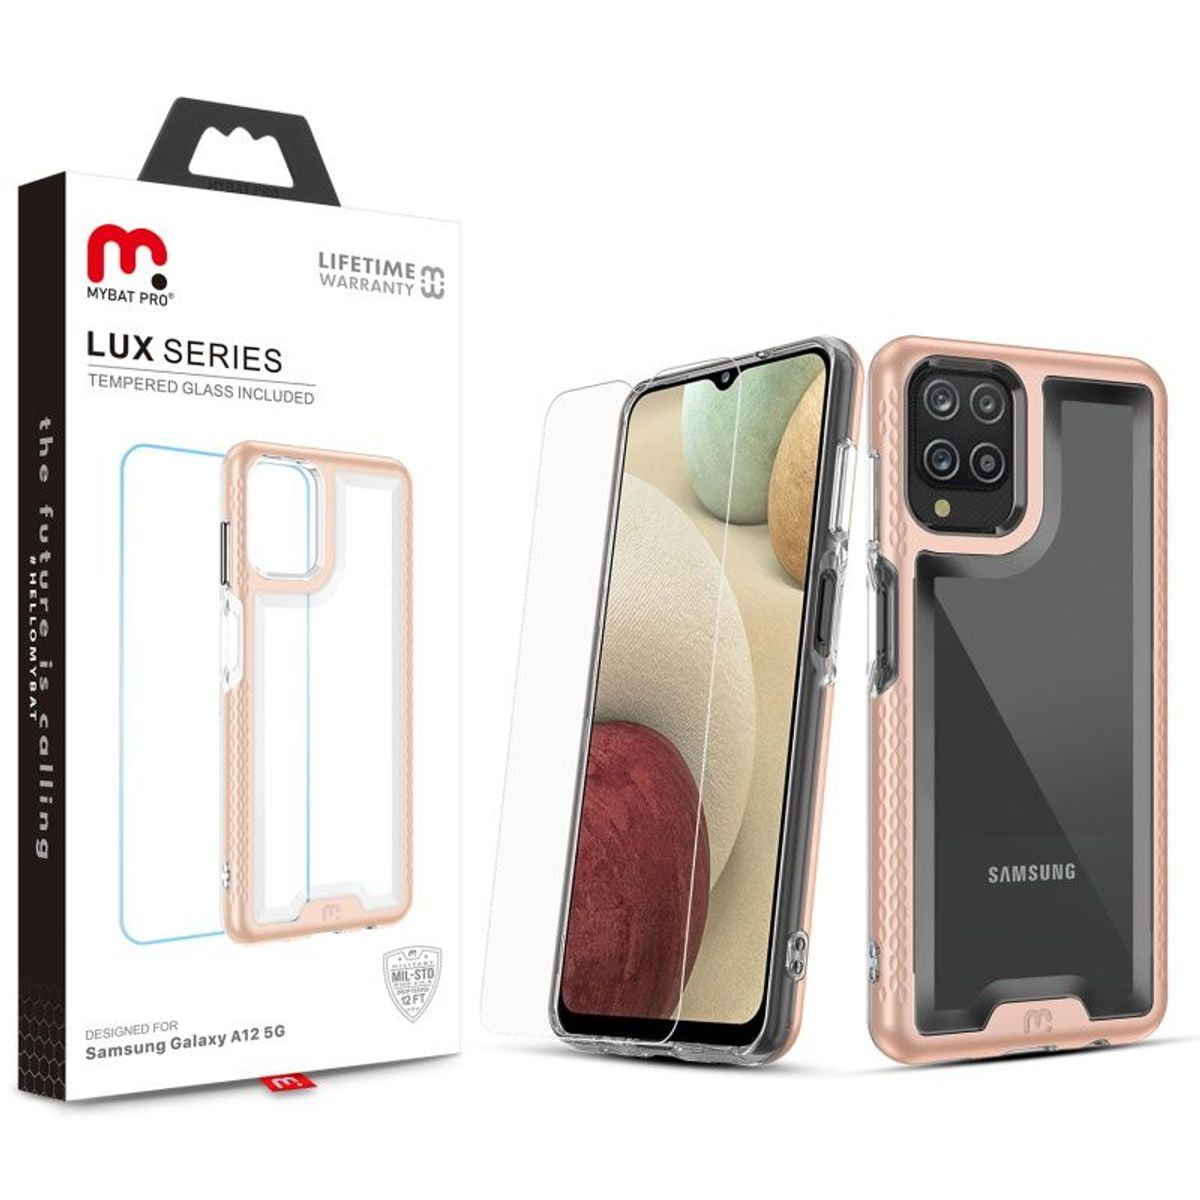 Slim Rose Gold/Transparent Clear Military Grade Protective Smartphone Case with Tempered Glass Screen Protector MyBat Pro Lux Series for iPhone 12 Pro Max 